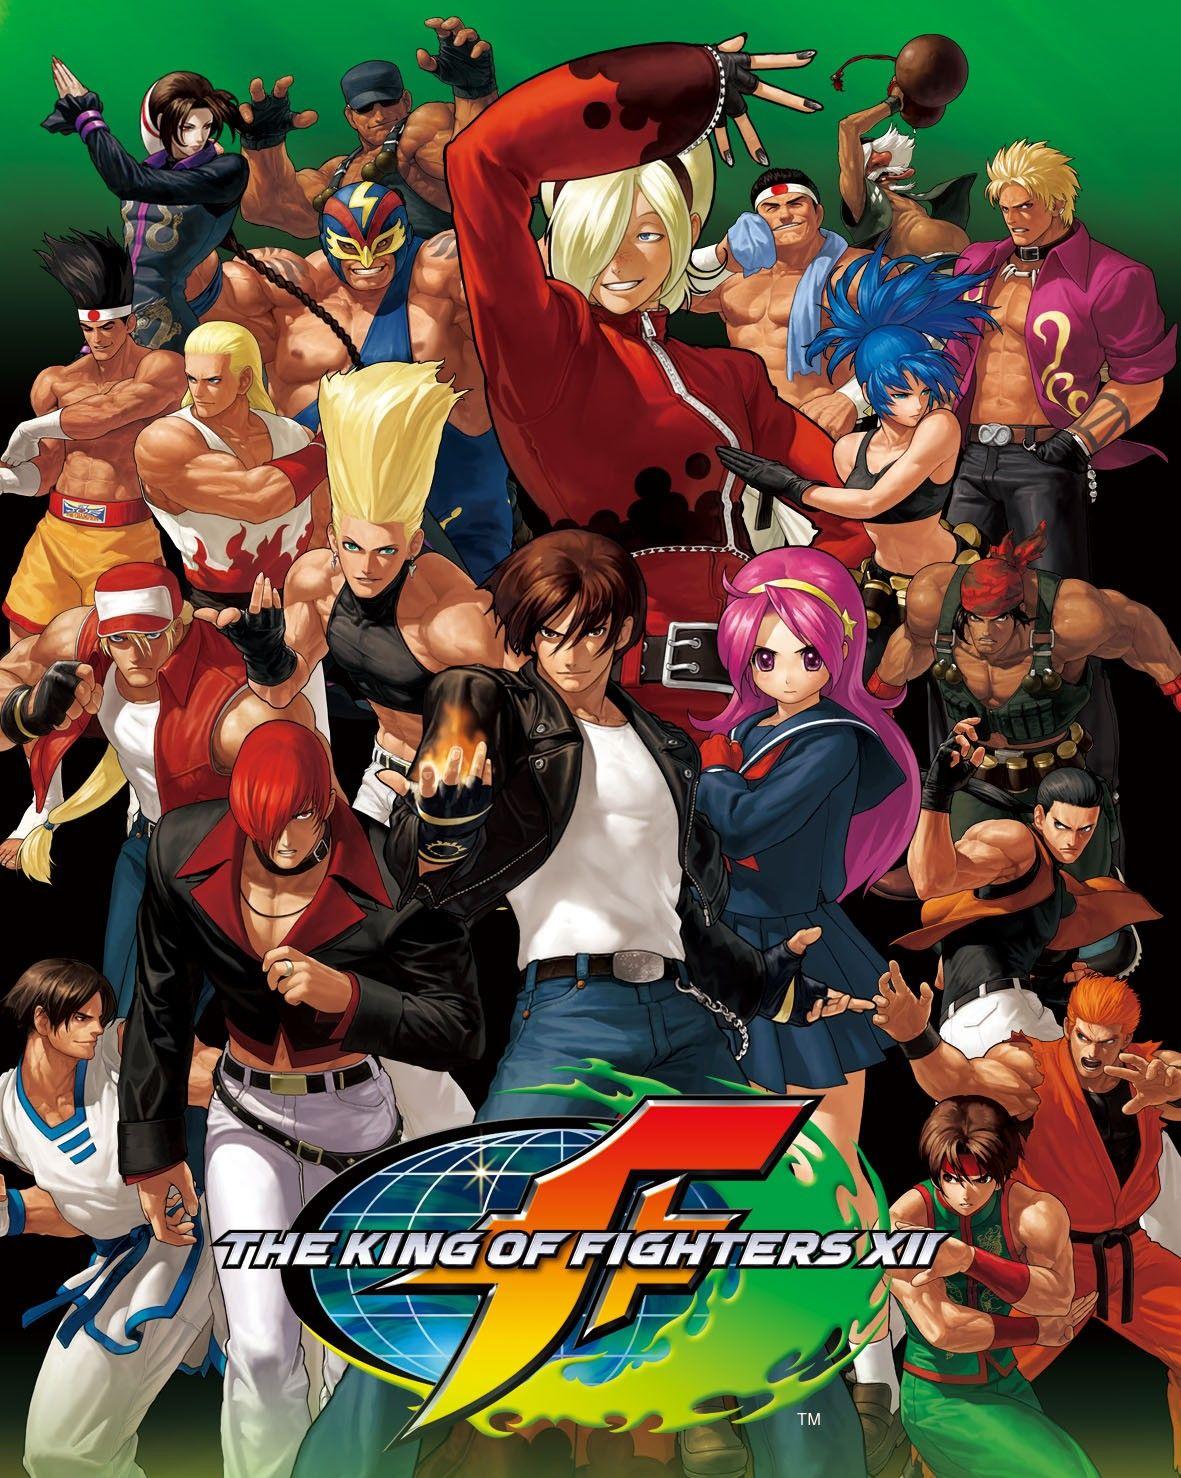 The King Of Fighters. Fight Games. King of fighters, Fotos